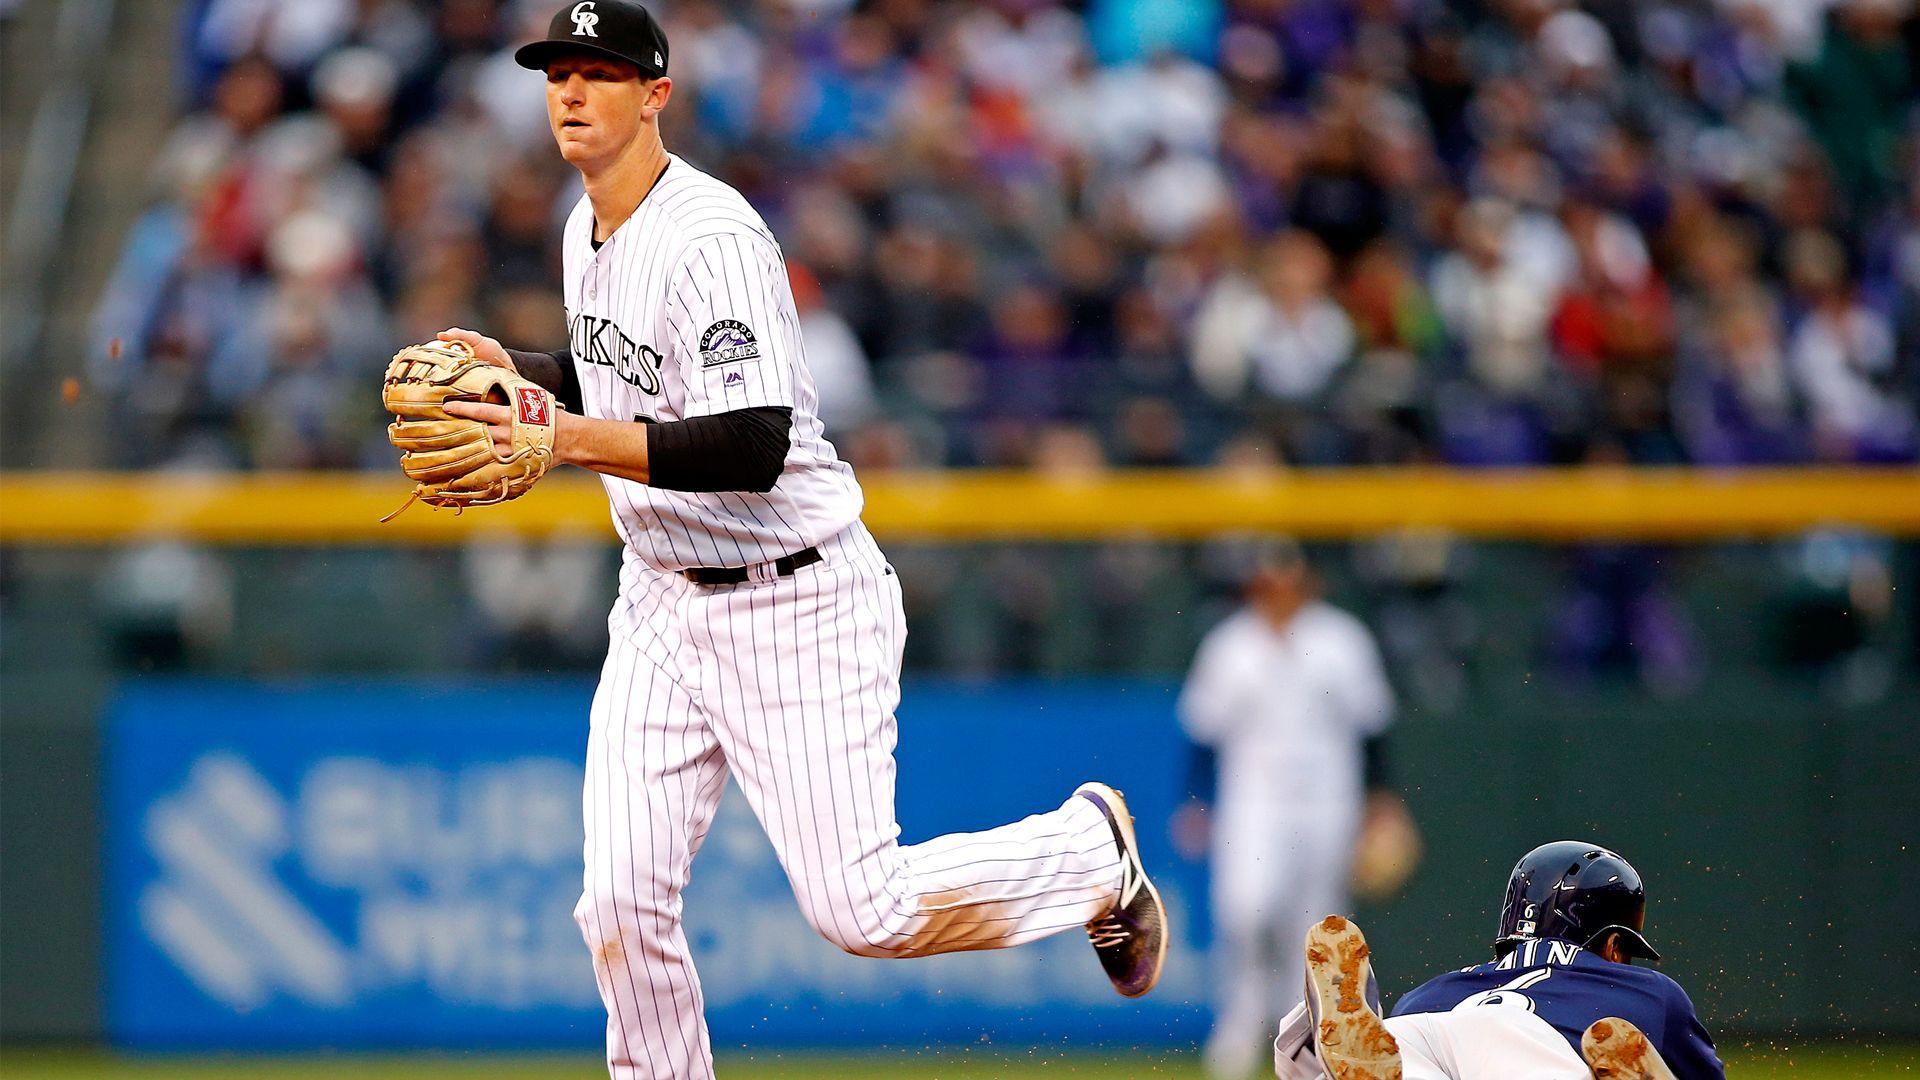 Source: A's express interest in DJ LeMahieu to bolster second base